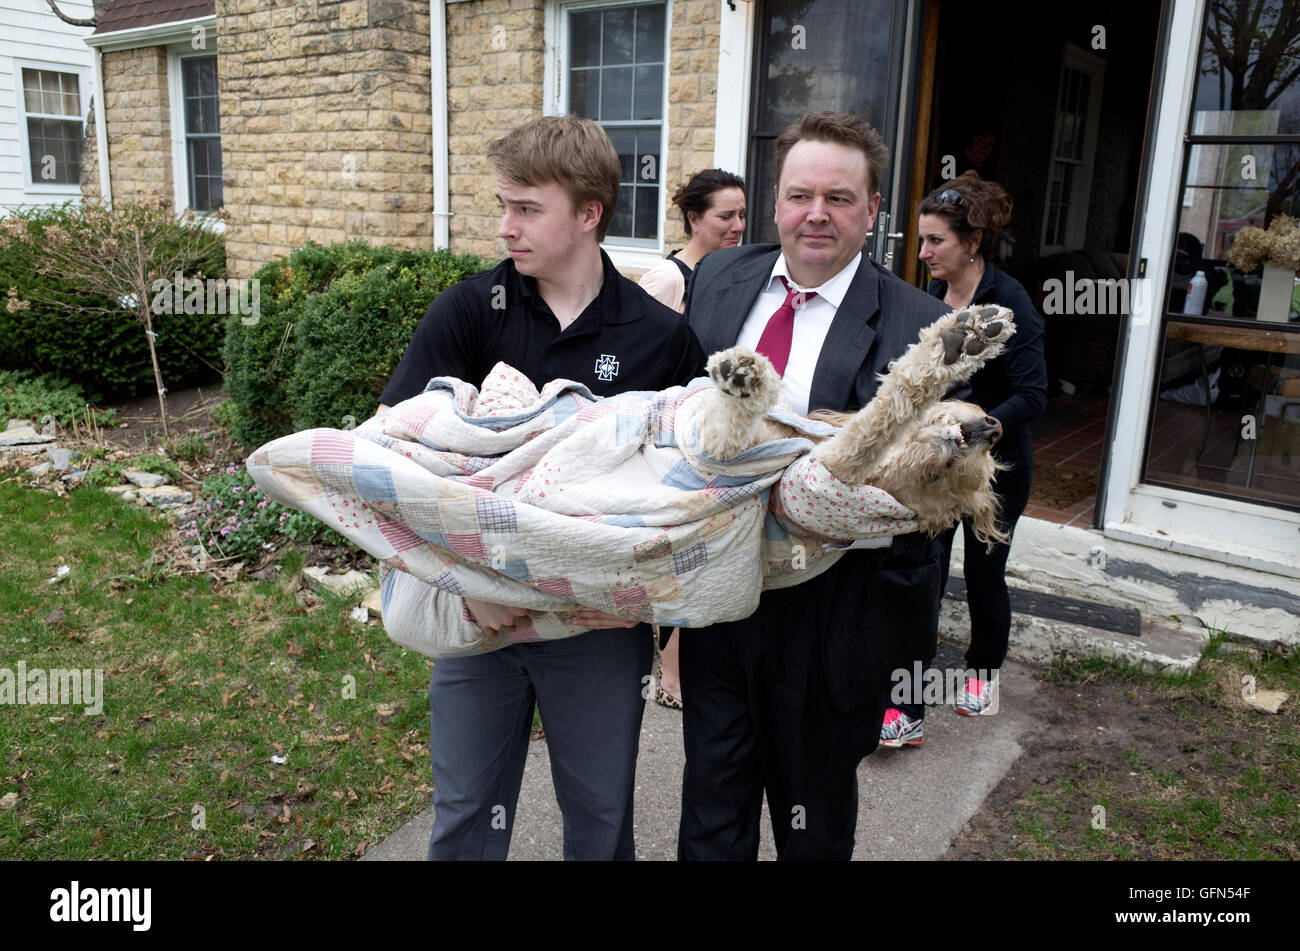 Father and son carrying our deceased granddog Gunnar to the vet for eventual cremation (whaa). St Paul Minnesota MN USA Stock Photo